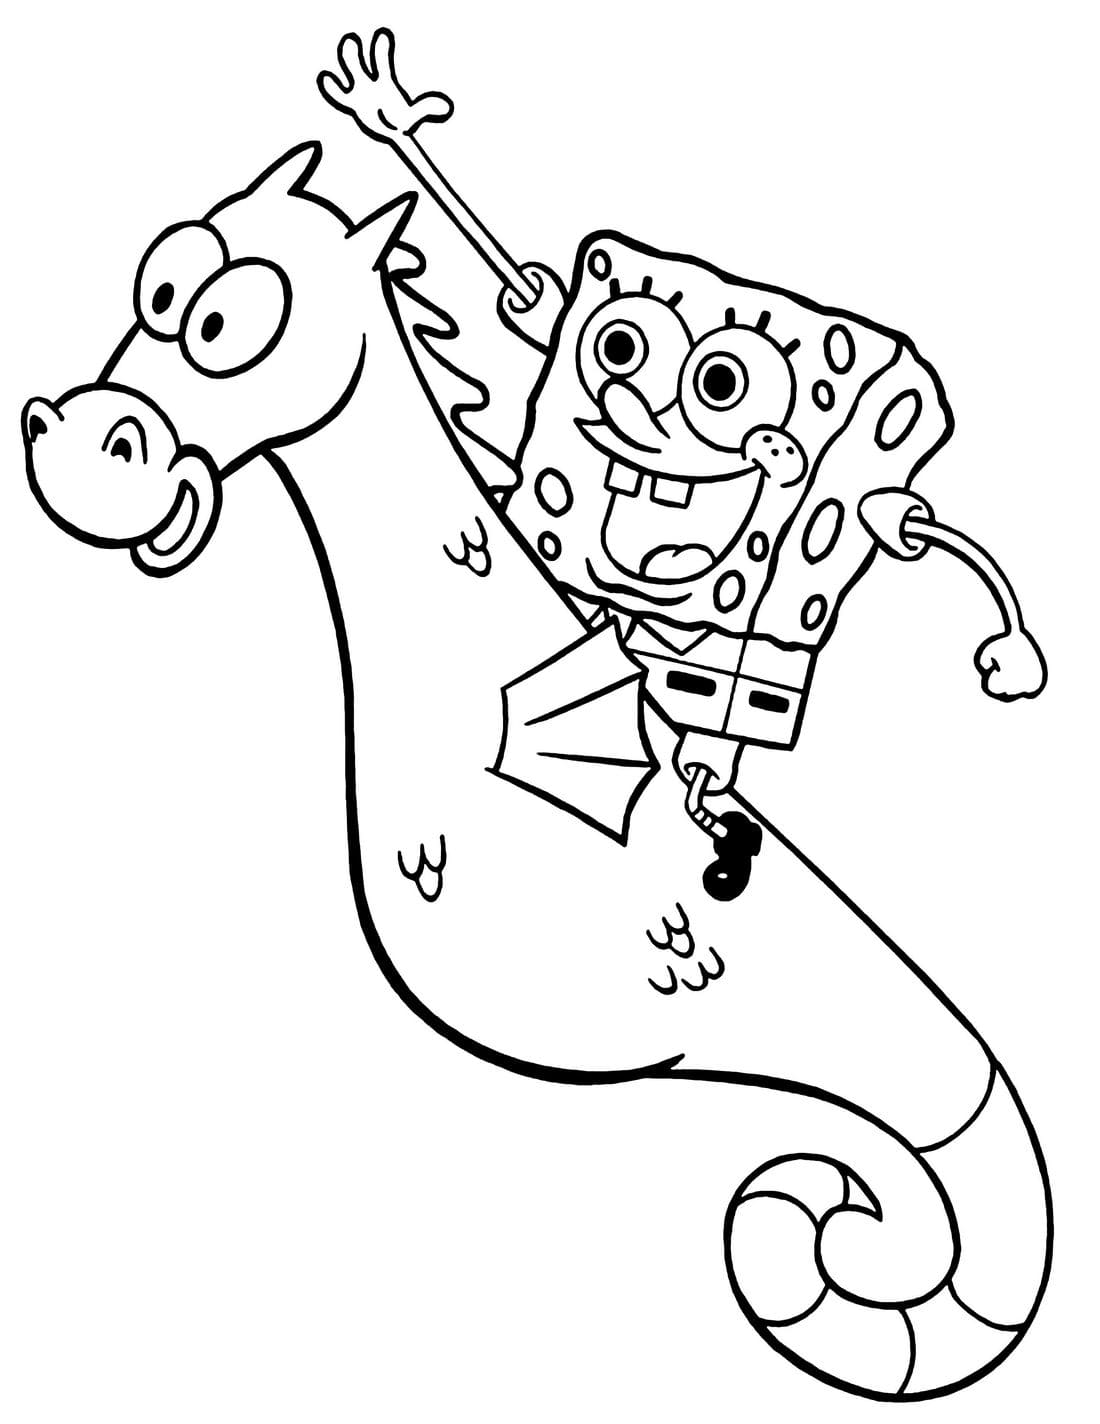 Funny Spongebob Coloring Pages Printables 87